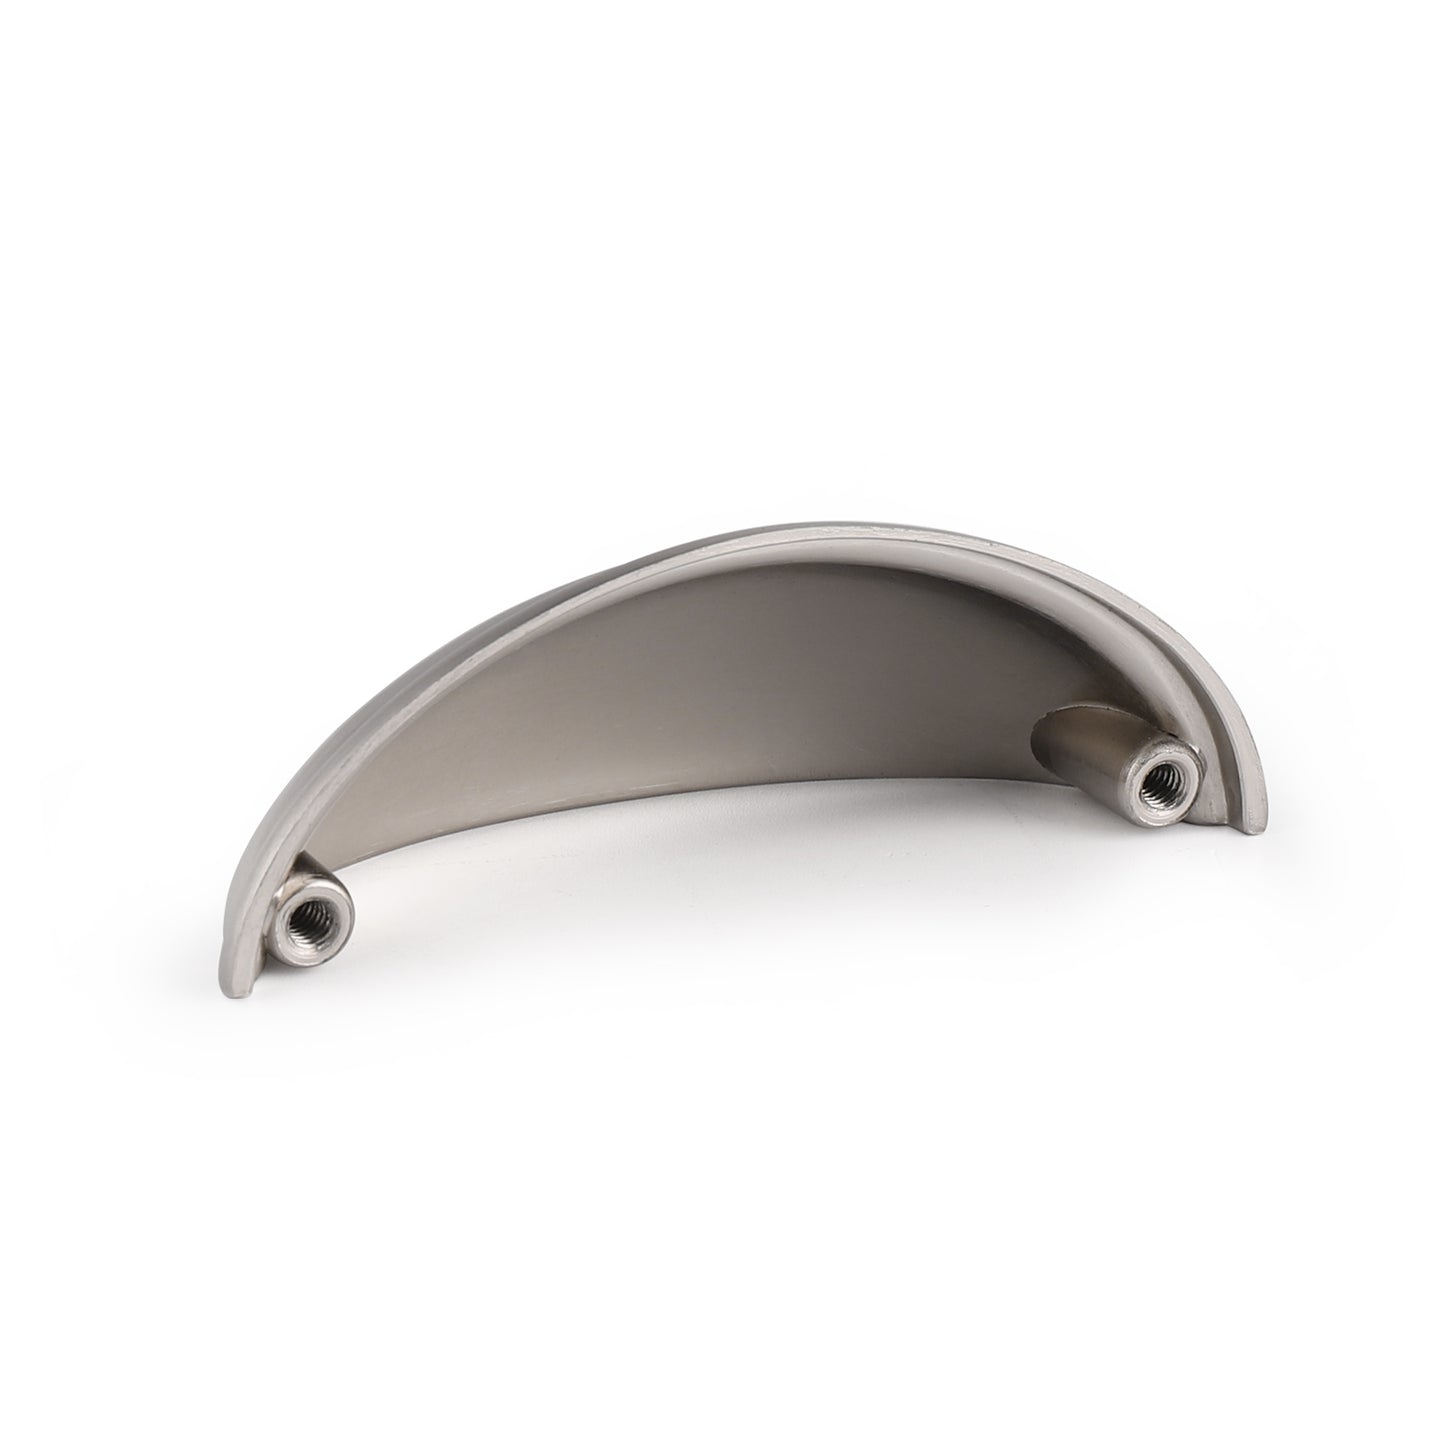 Satin Nickel Cup Pulls 76mm 3inch Hole Centers, Kitchen Cabinets Hardware PD82981 - Probrico